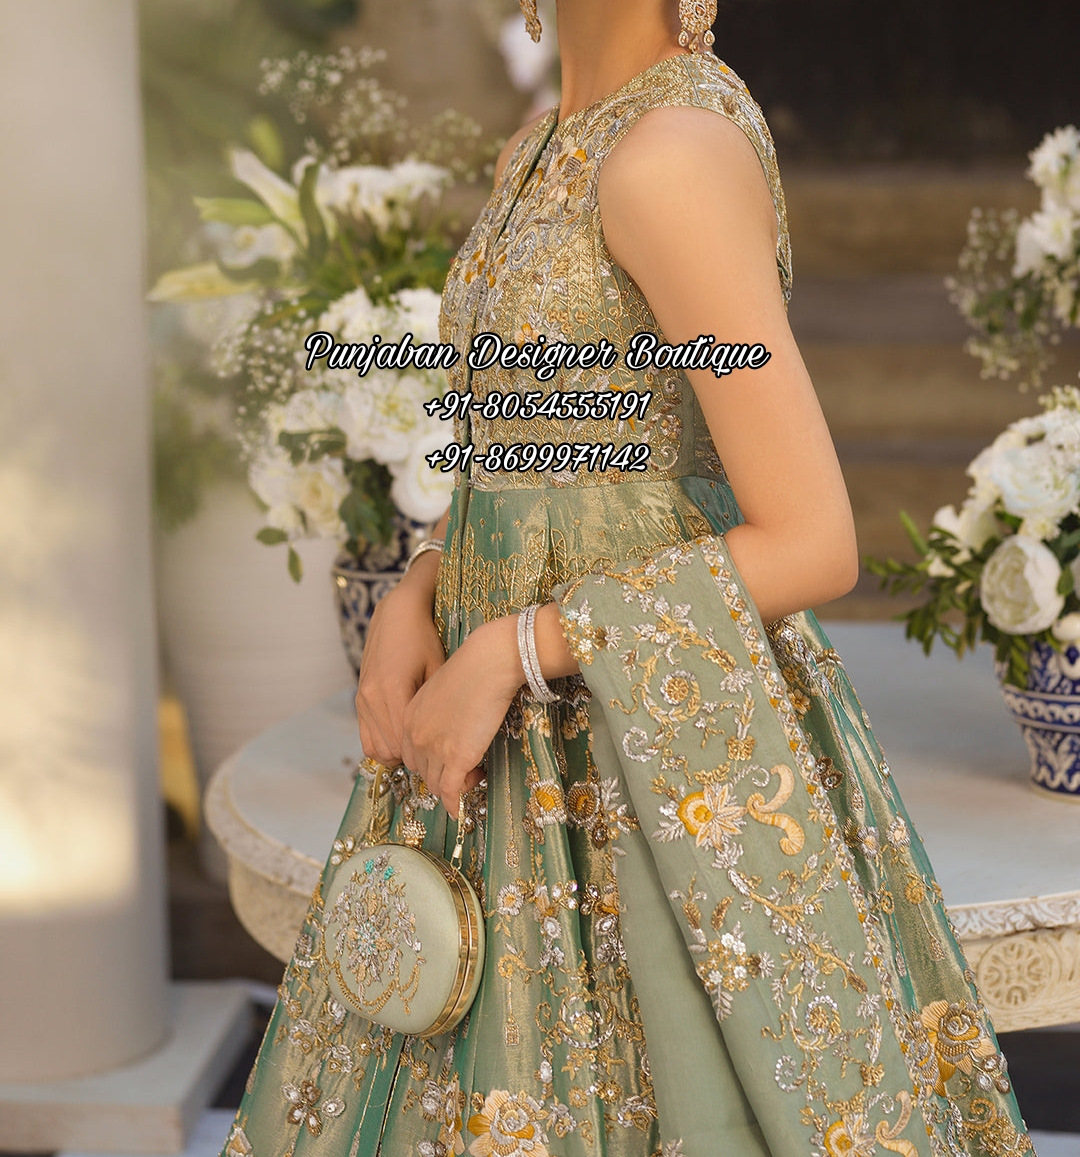 Ethnic Gowns | Designer Engagement Gown | Freeup